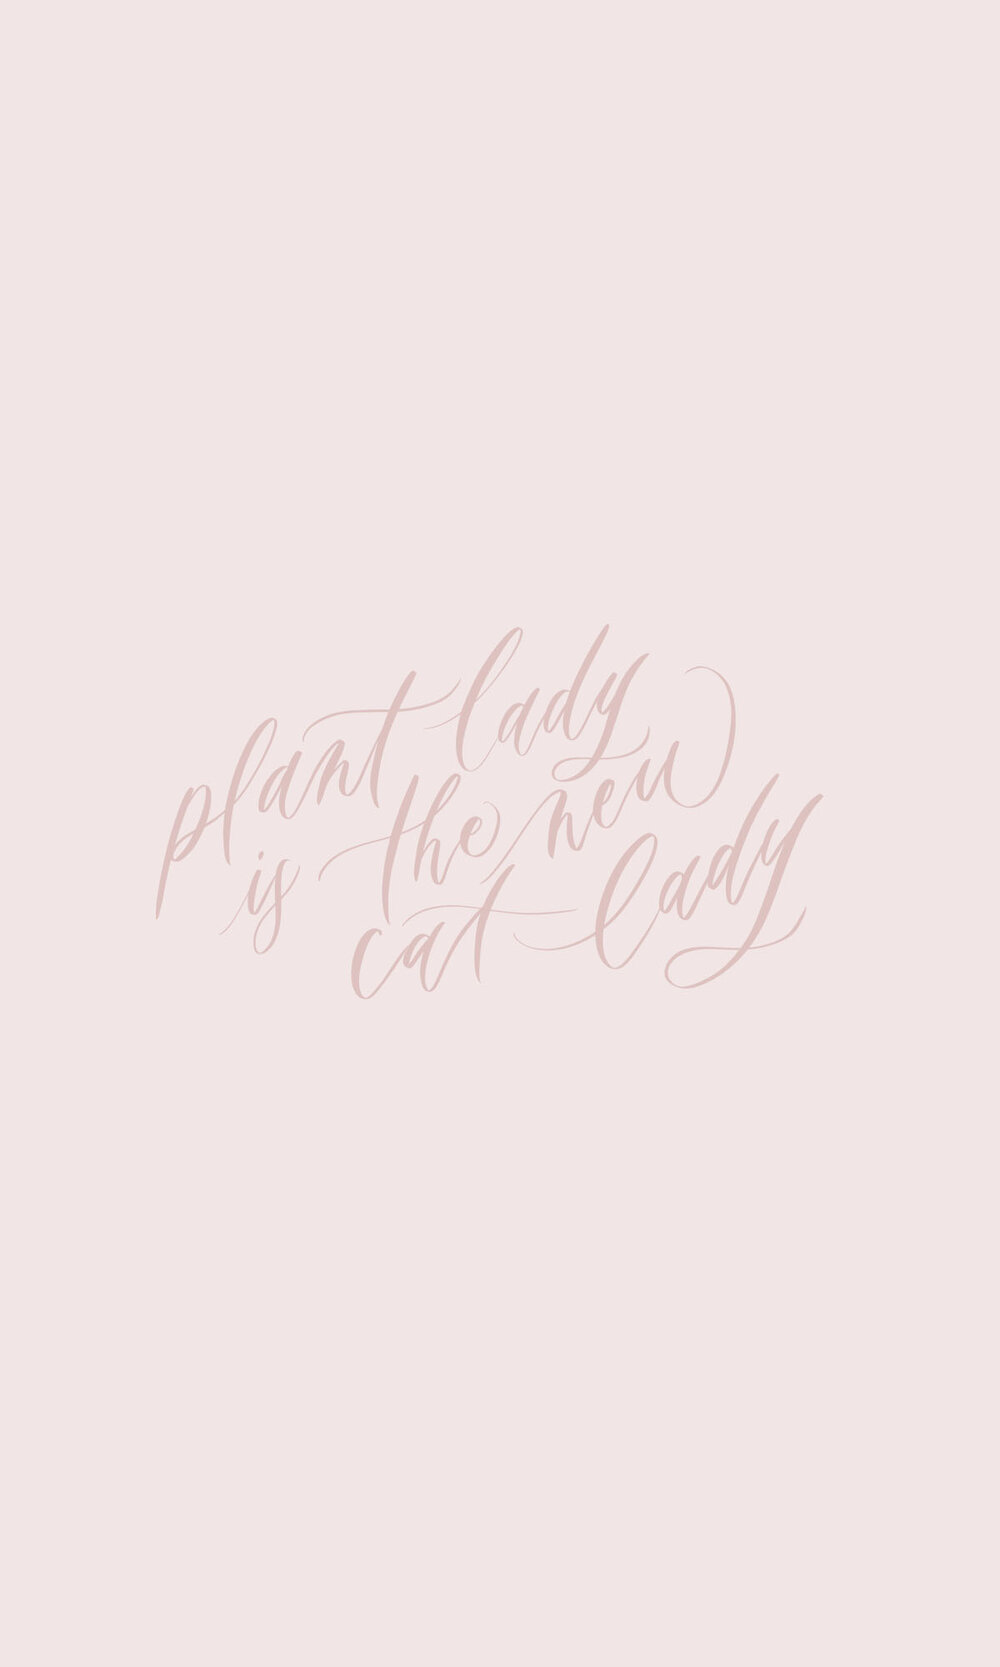 Someday Art Co - Plant Lady | A Surface Pattern Design available for ...